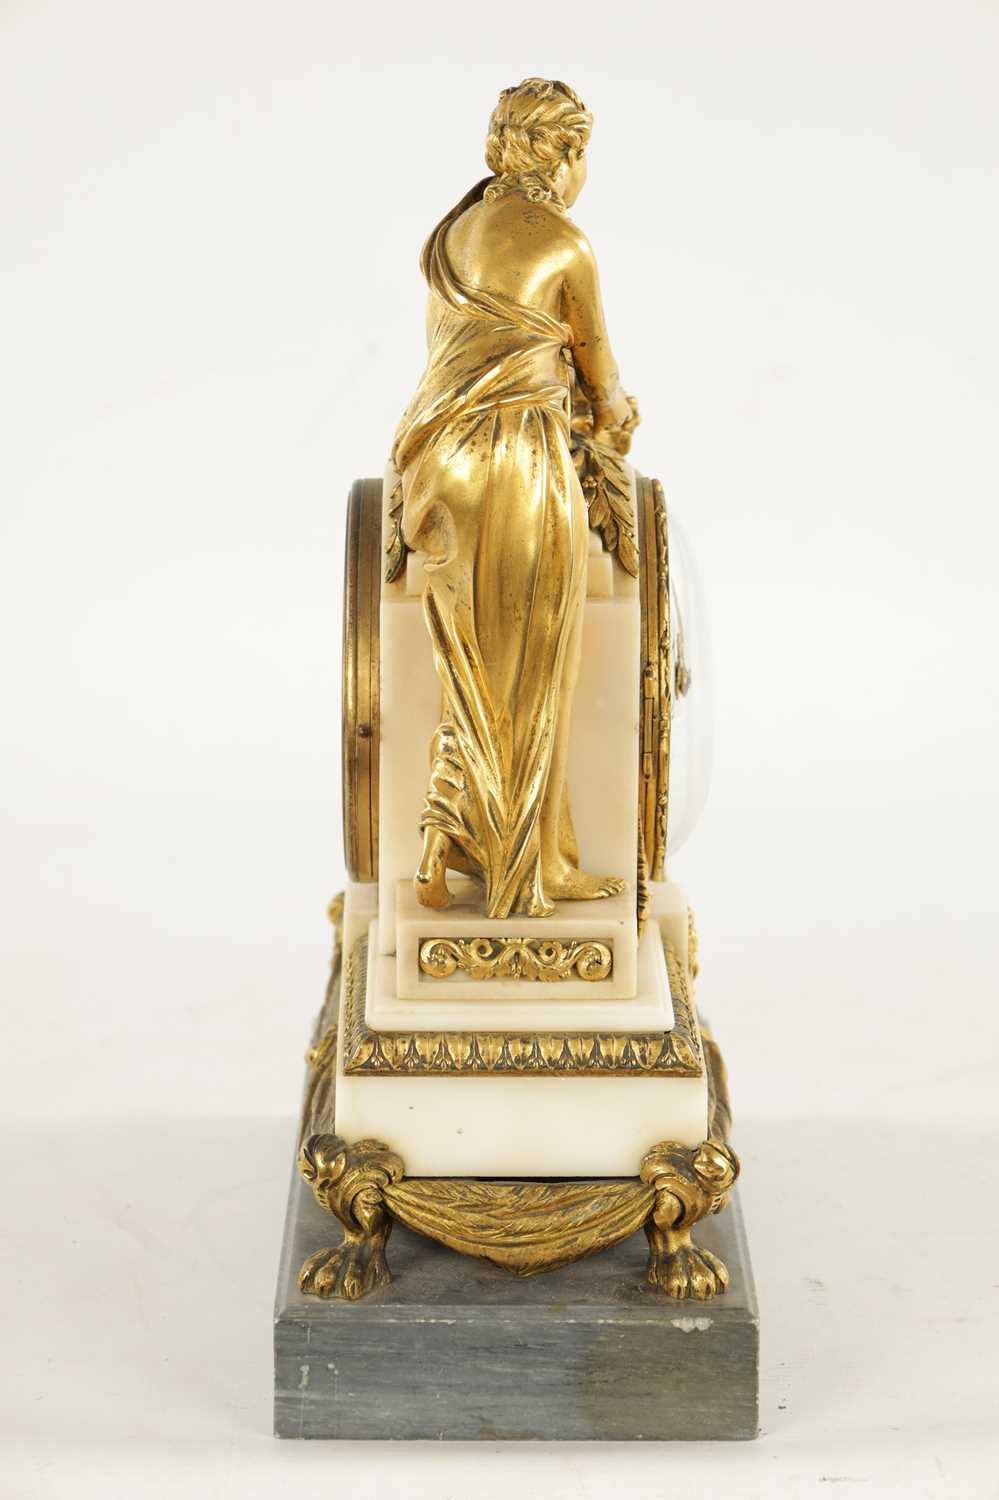 CHARLES LEROY, A PARIS. A FRENCH LOUIS XVI ORMOLU AND MARBLE FIGURAL MANTEL CLOCK - Image 7 of 11